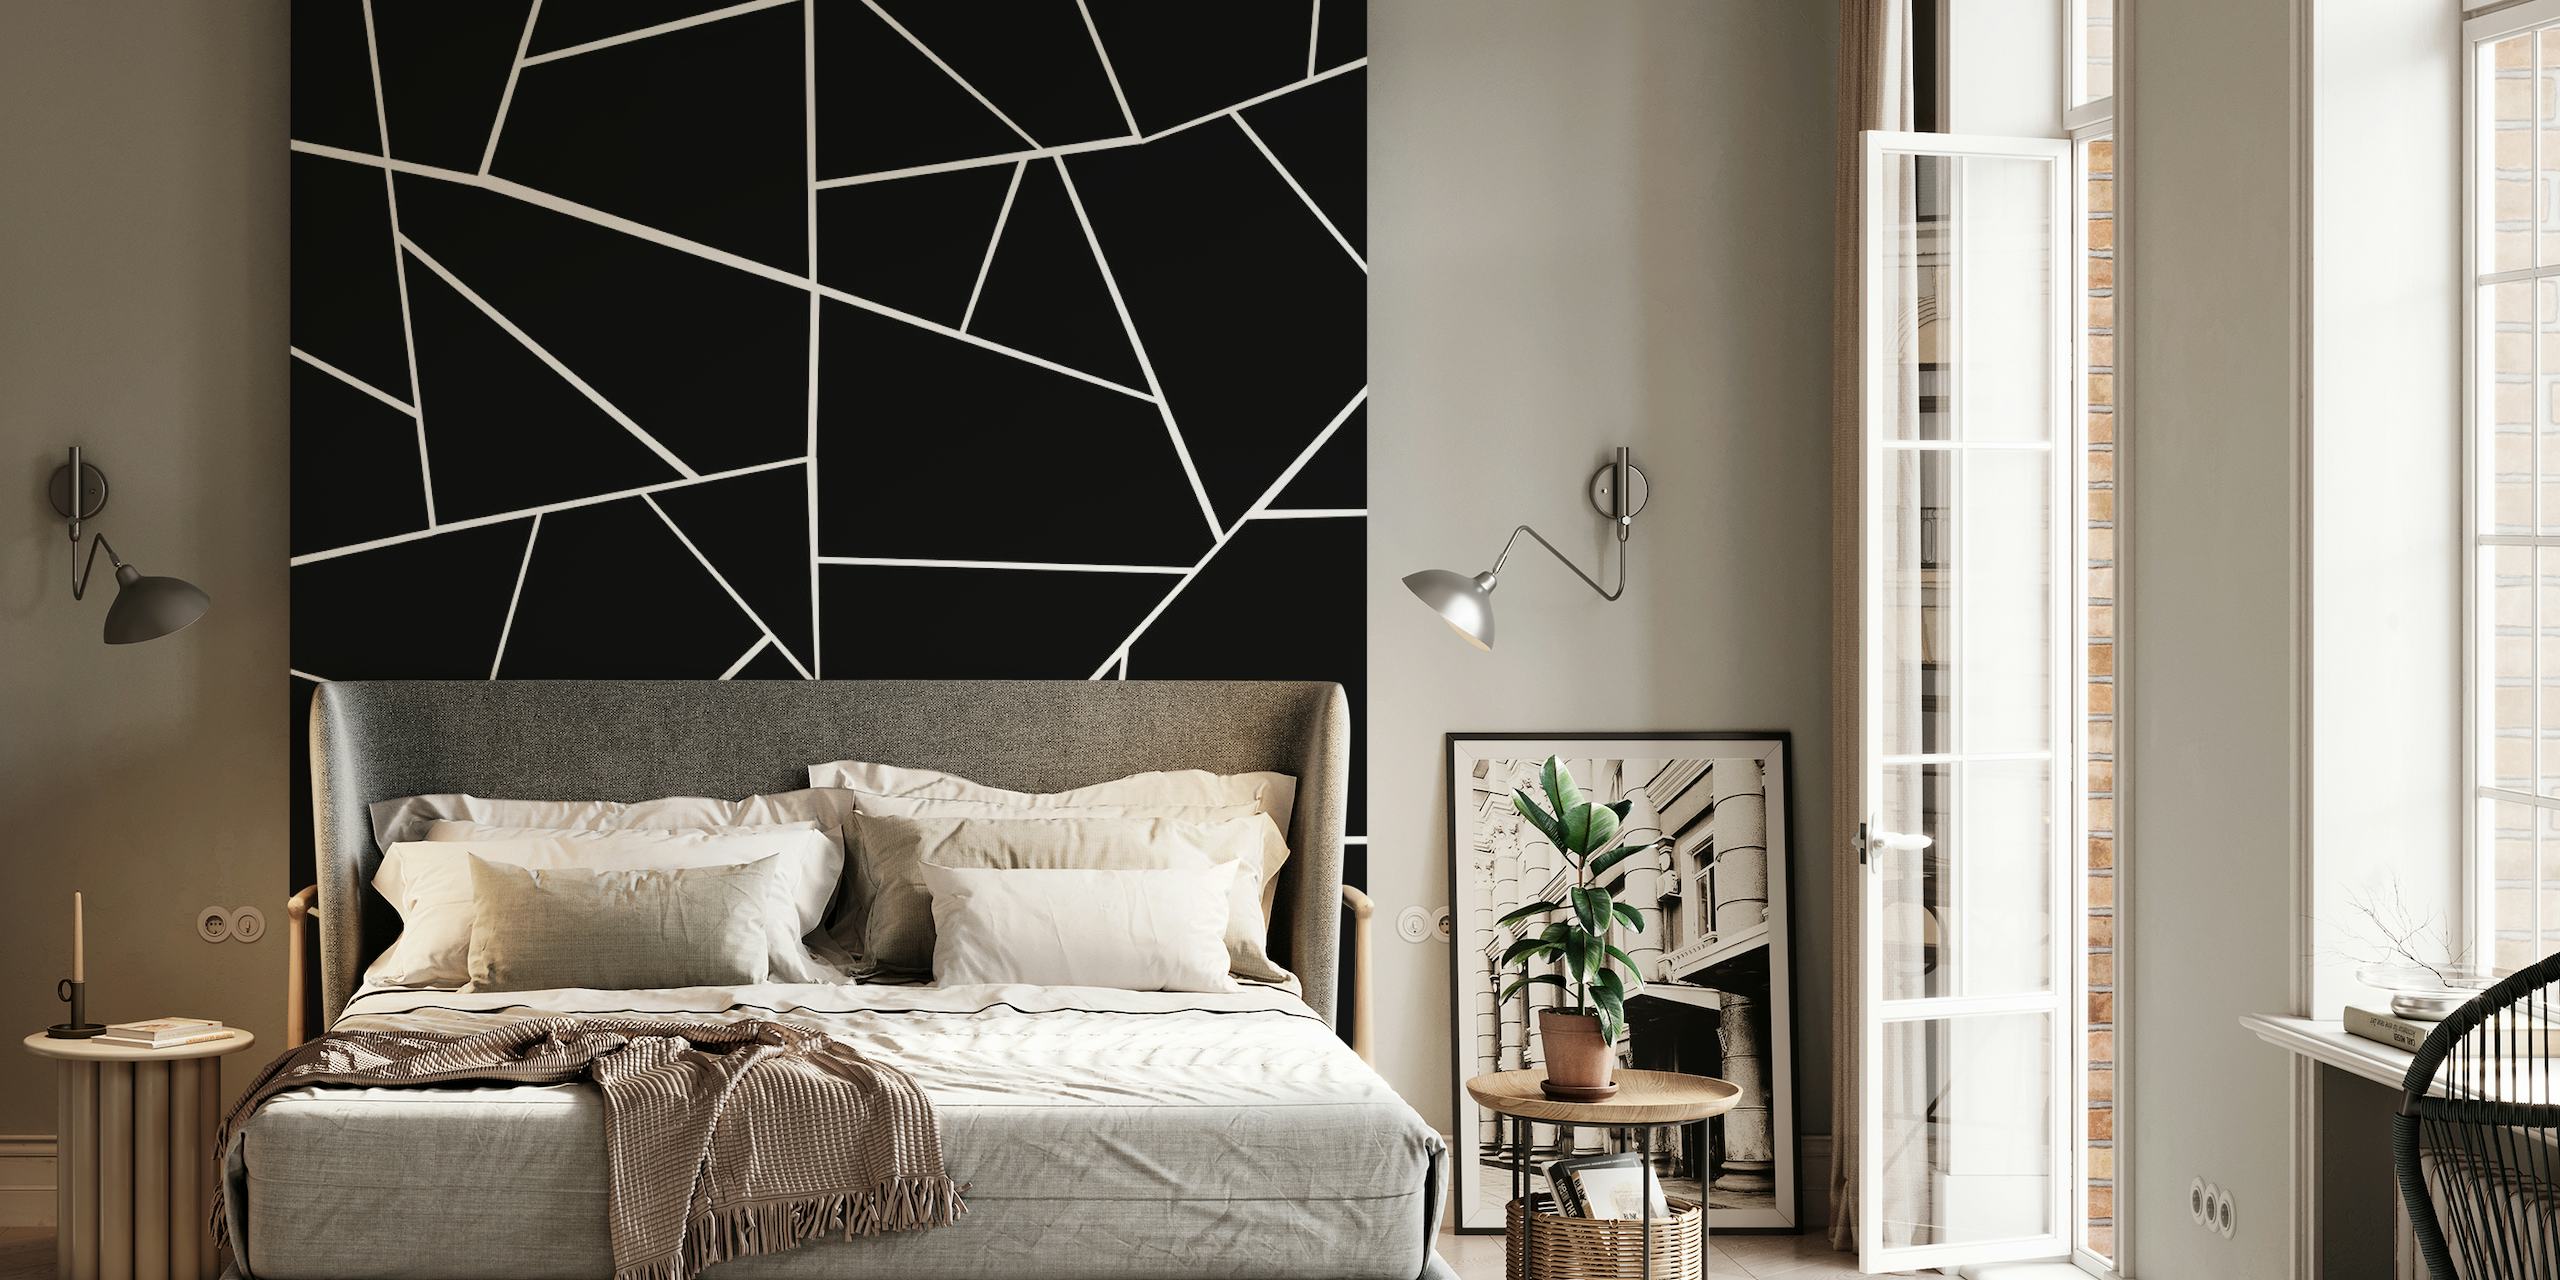 Black and white geometric pattern wall mural with sharp lines and angles creating a modern look.